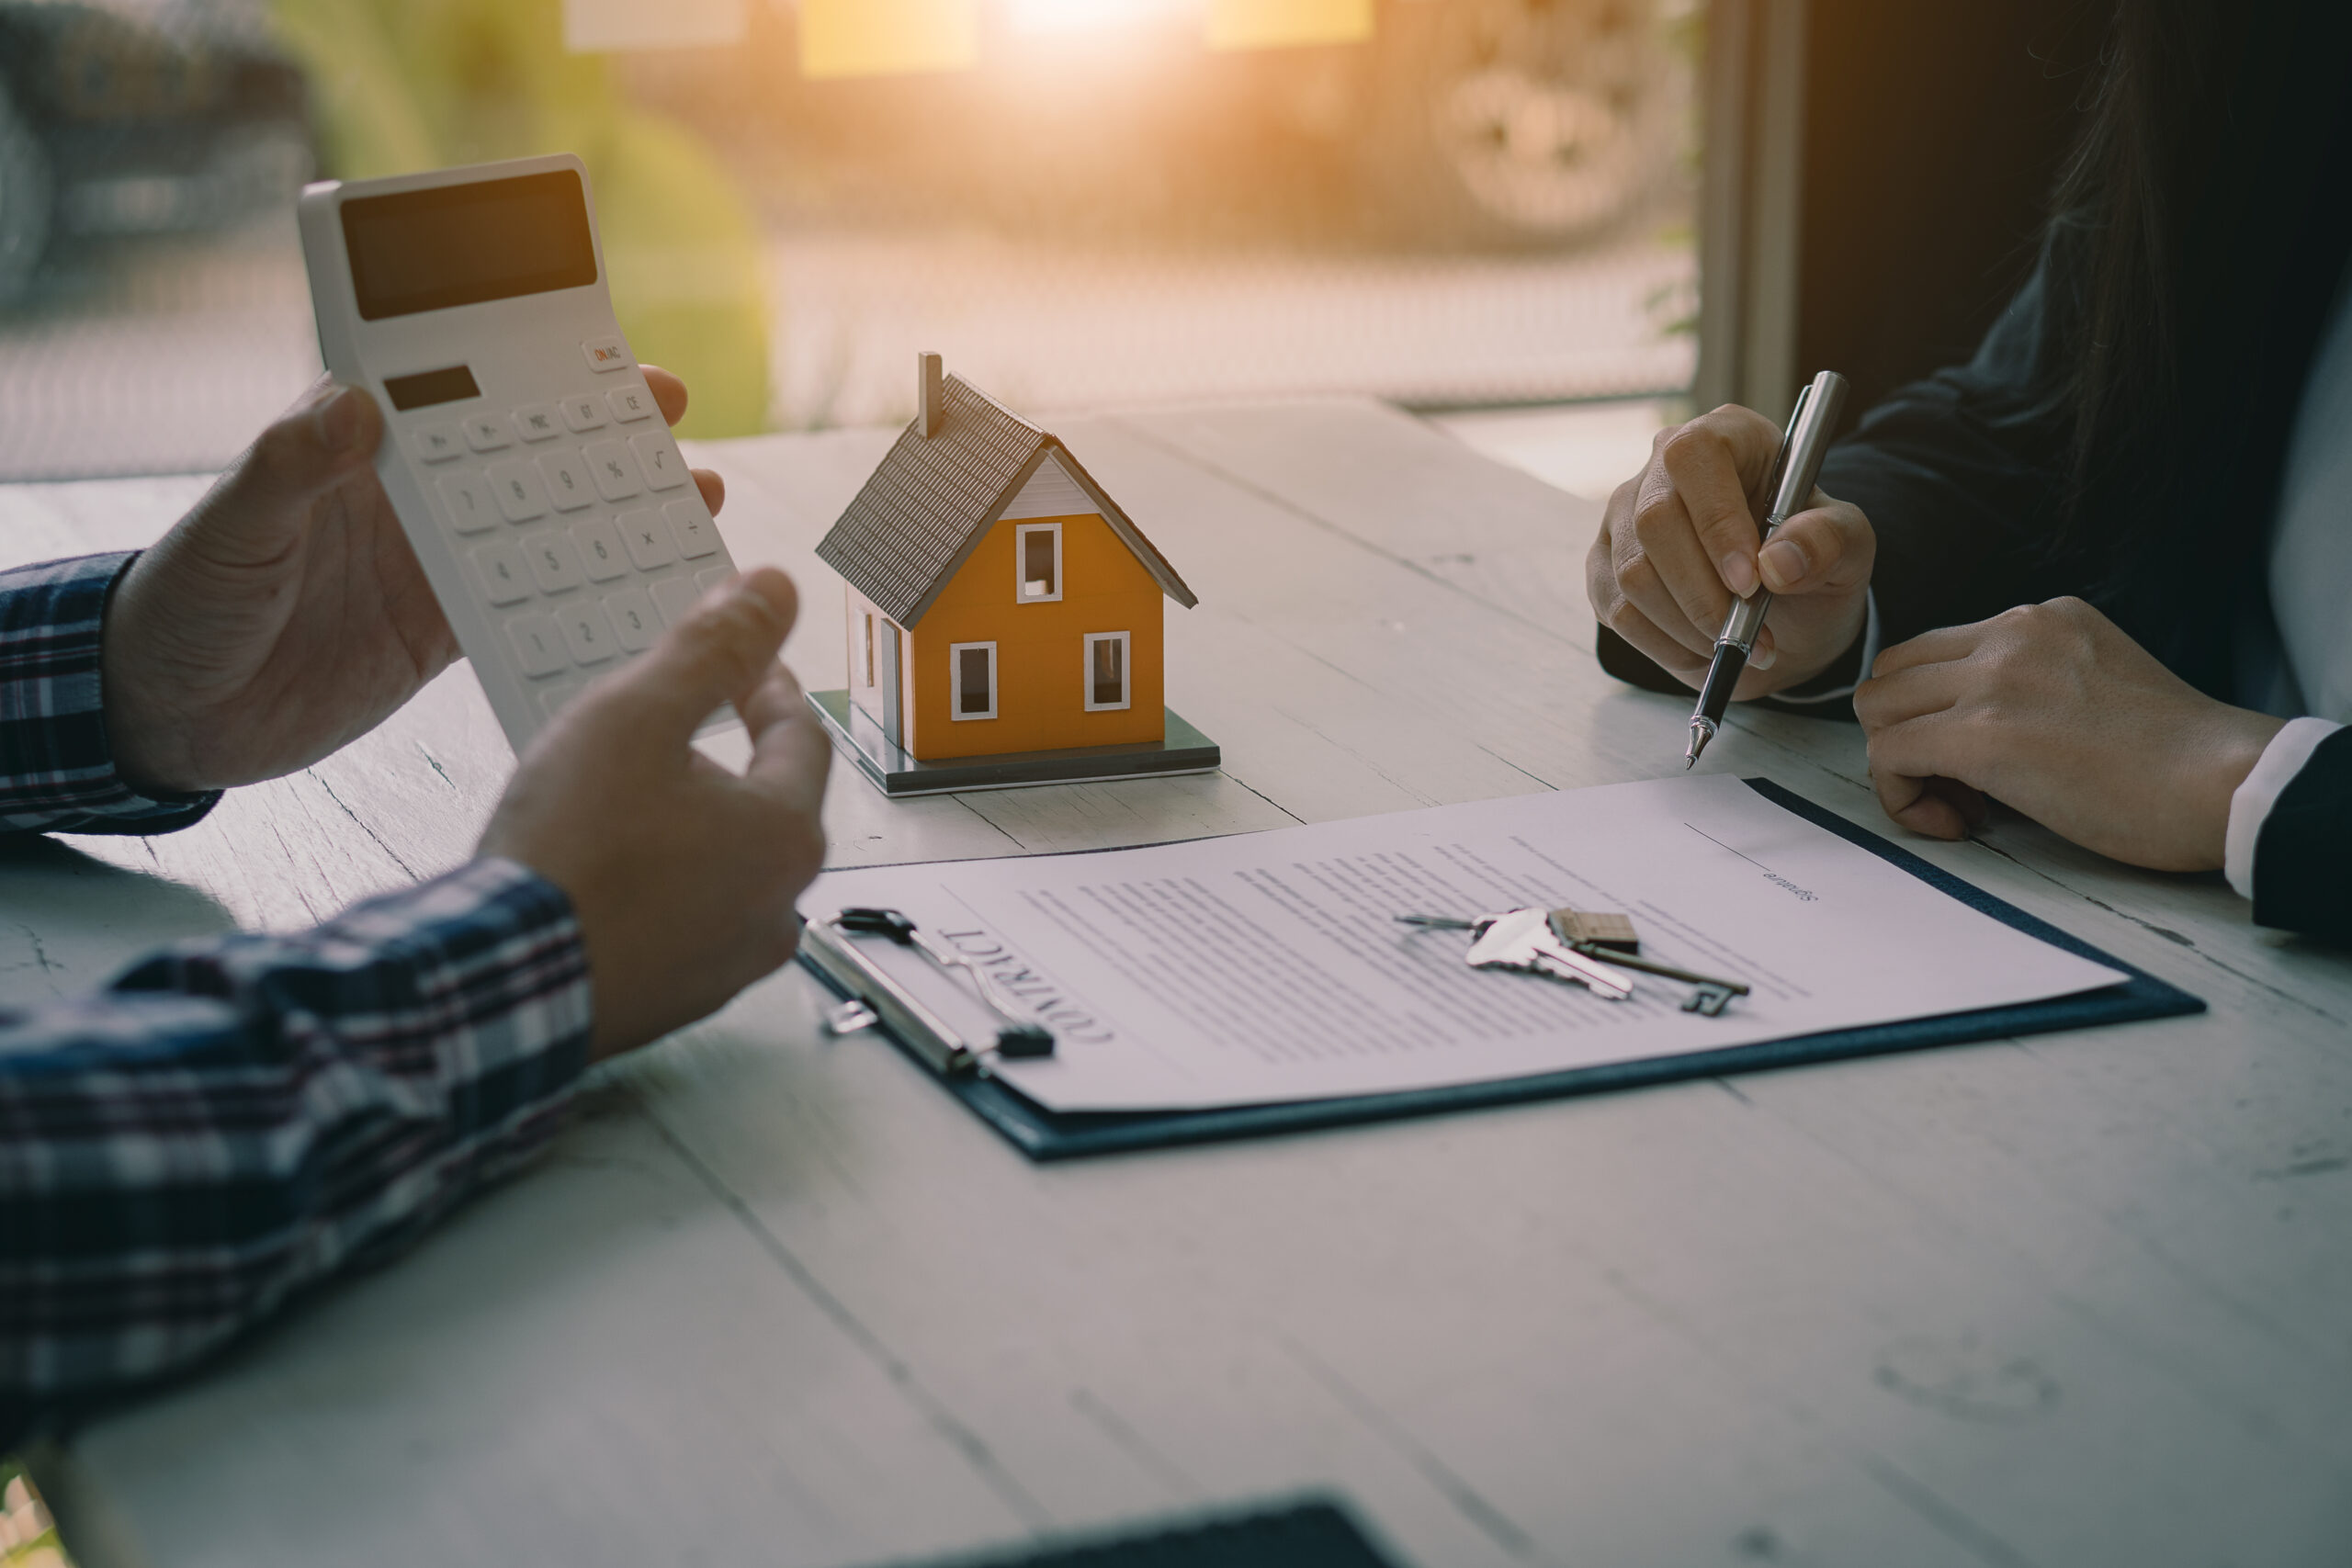 Real Estate Professionals Offer Their Clients Contracts To Discuss Home Purchases, Insurance Or Real Estate Loans. Home Sales Agents Sit At The Office With New Home Buyers In The Office.